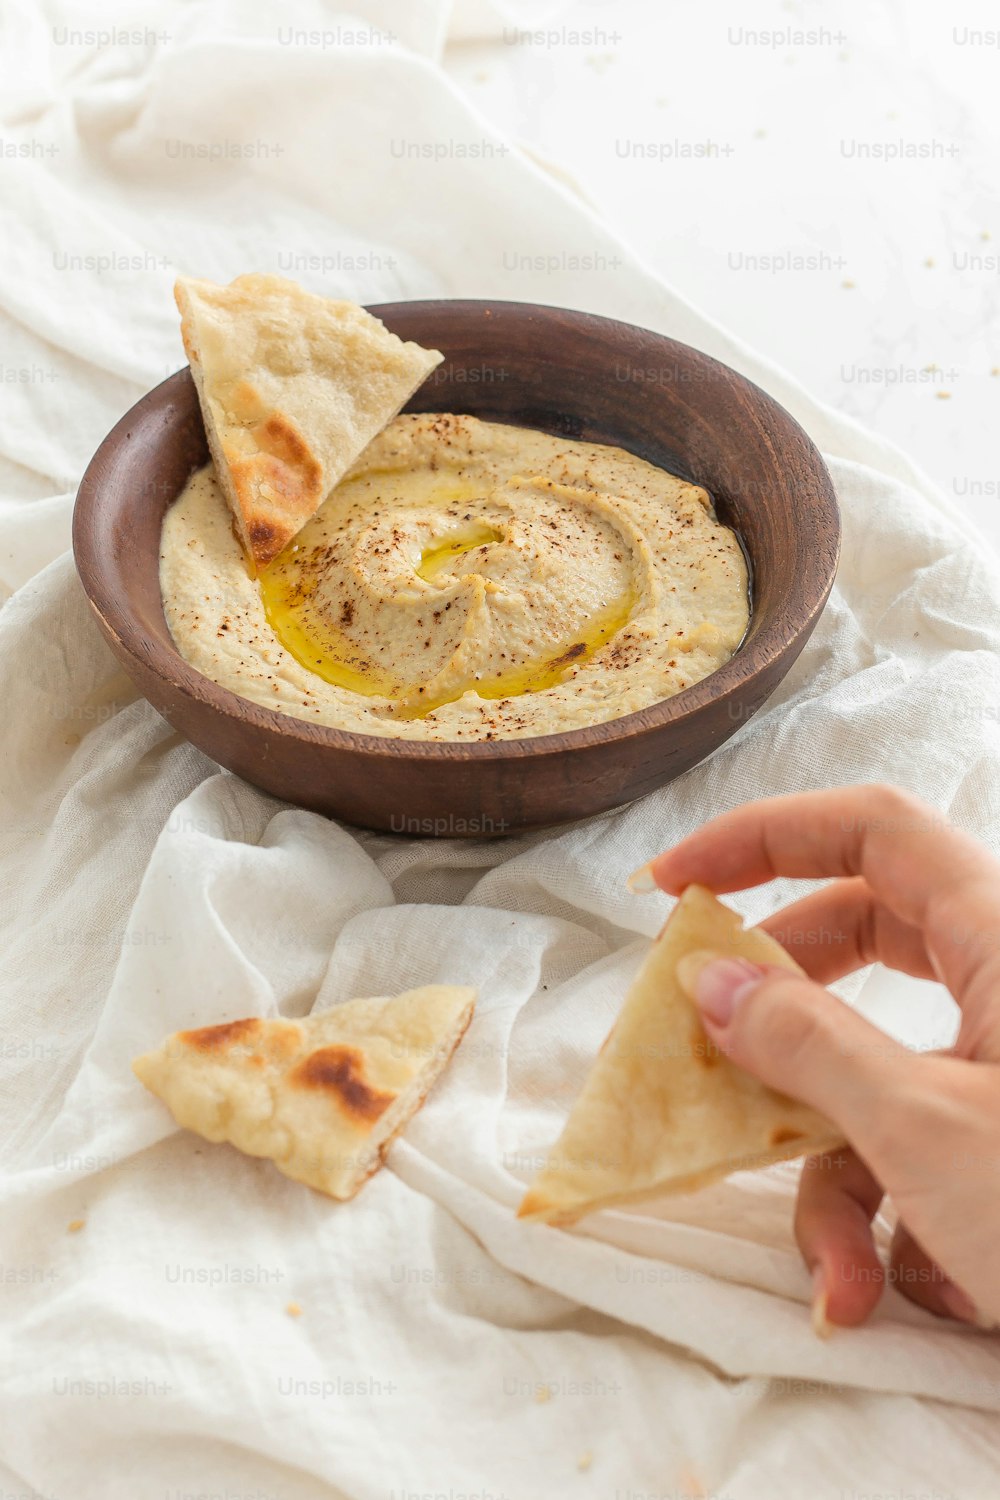 a bowl of hummus and pita chips on a table